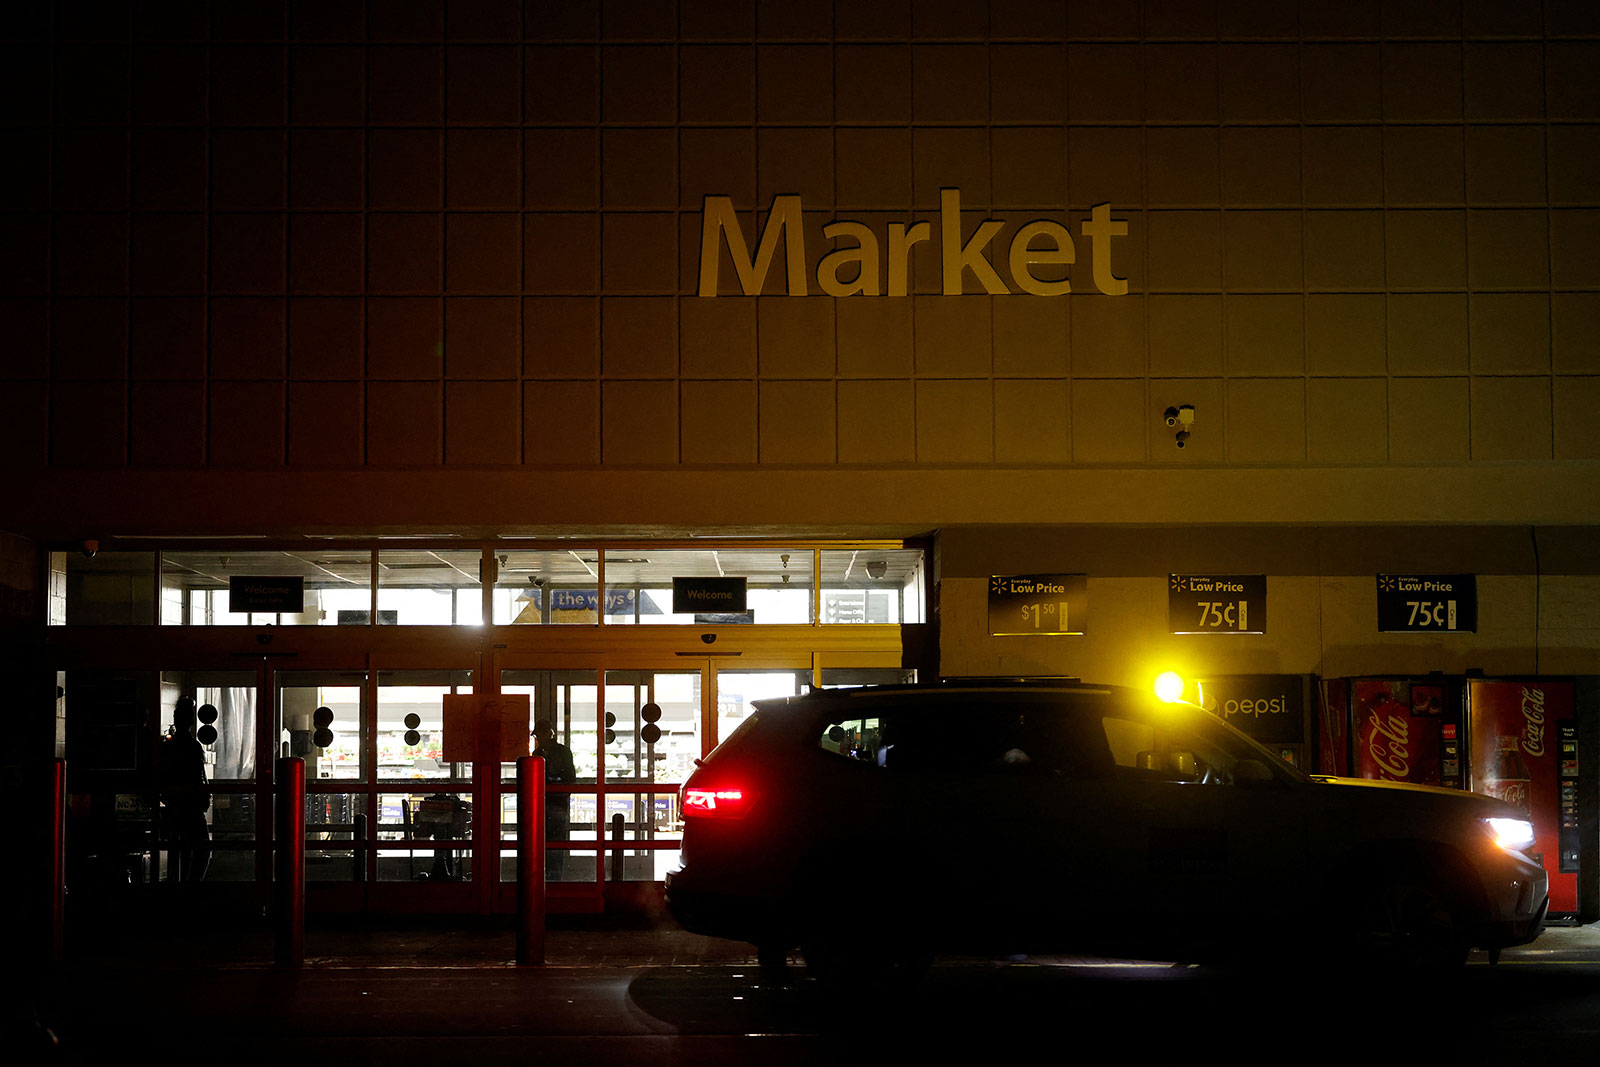 A security patrol car guards the closed entrance to a local Walmart store which was running a generator to light its interior in Aberdeen, North Carolina, on December 4.